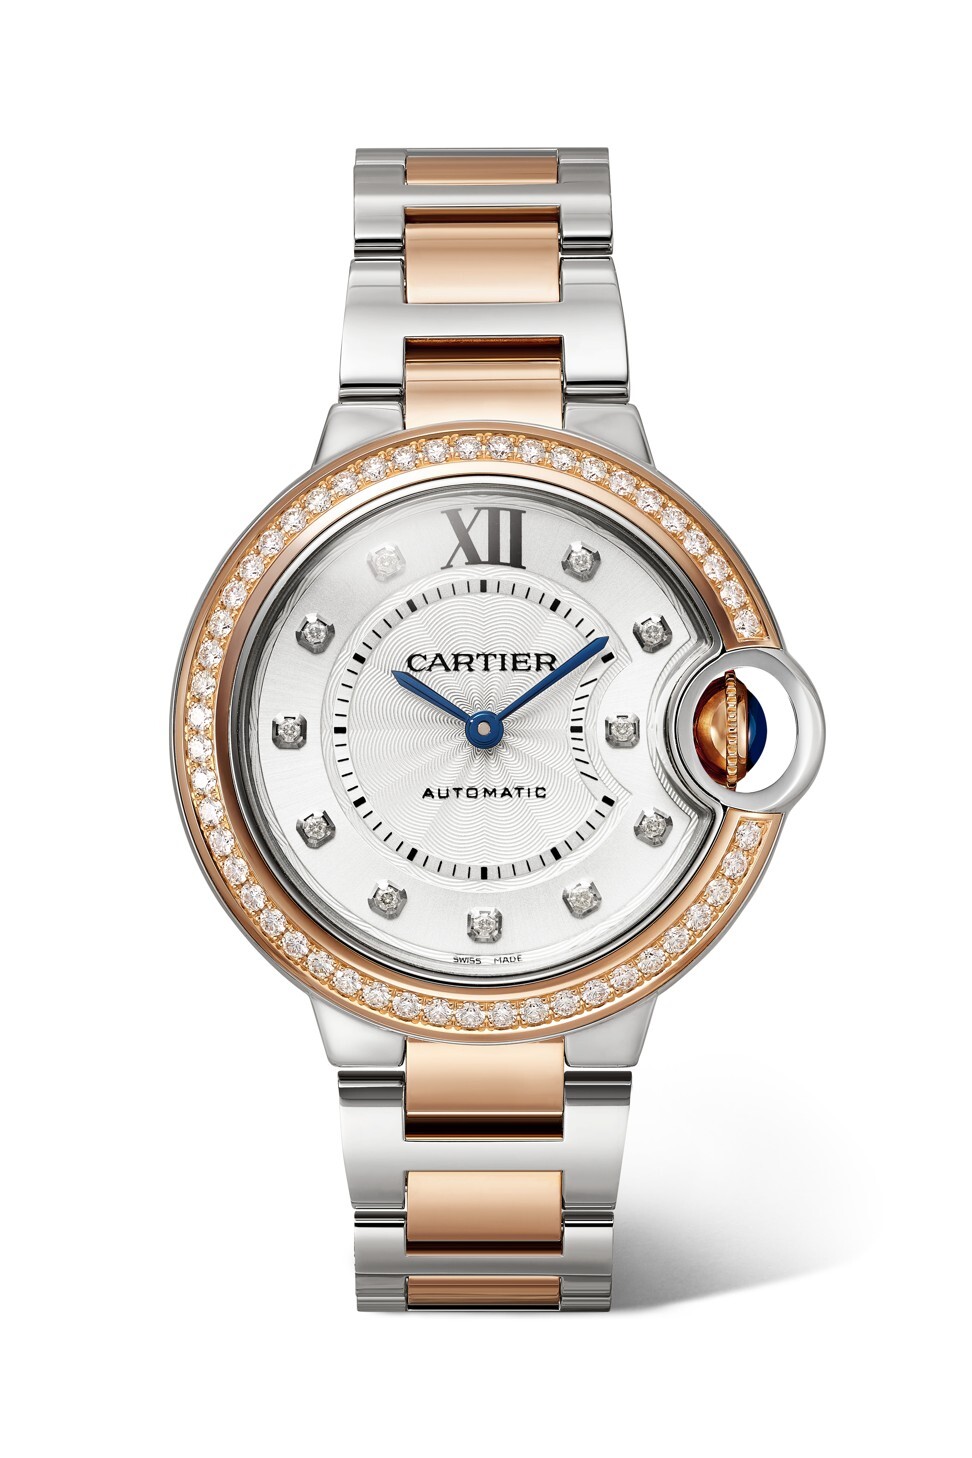 A Cartier watch available on Net-a-Porter, an early online retail platform for luxury brands. Photo: Cartier